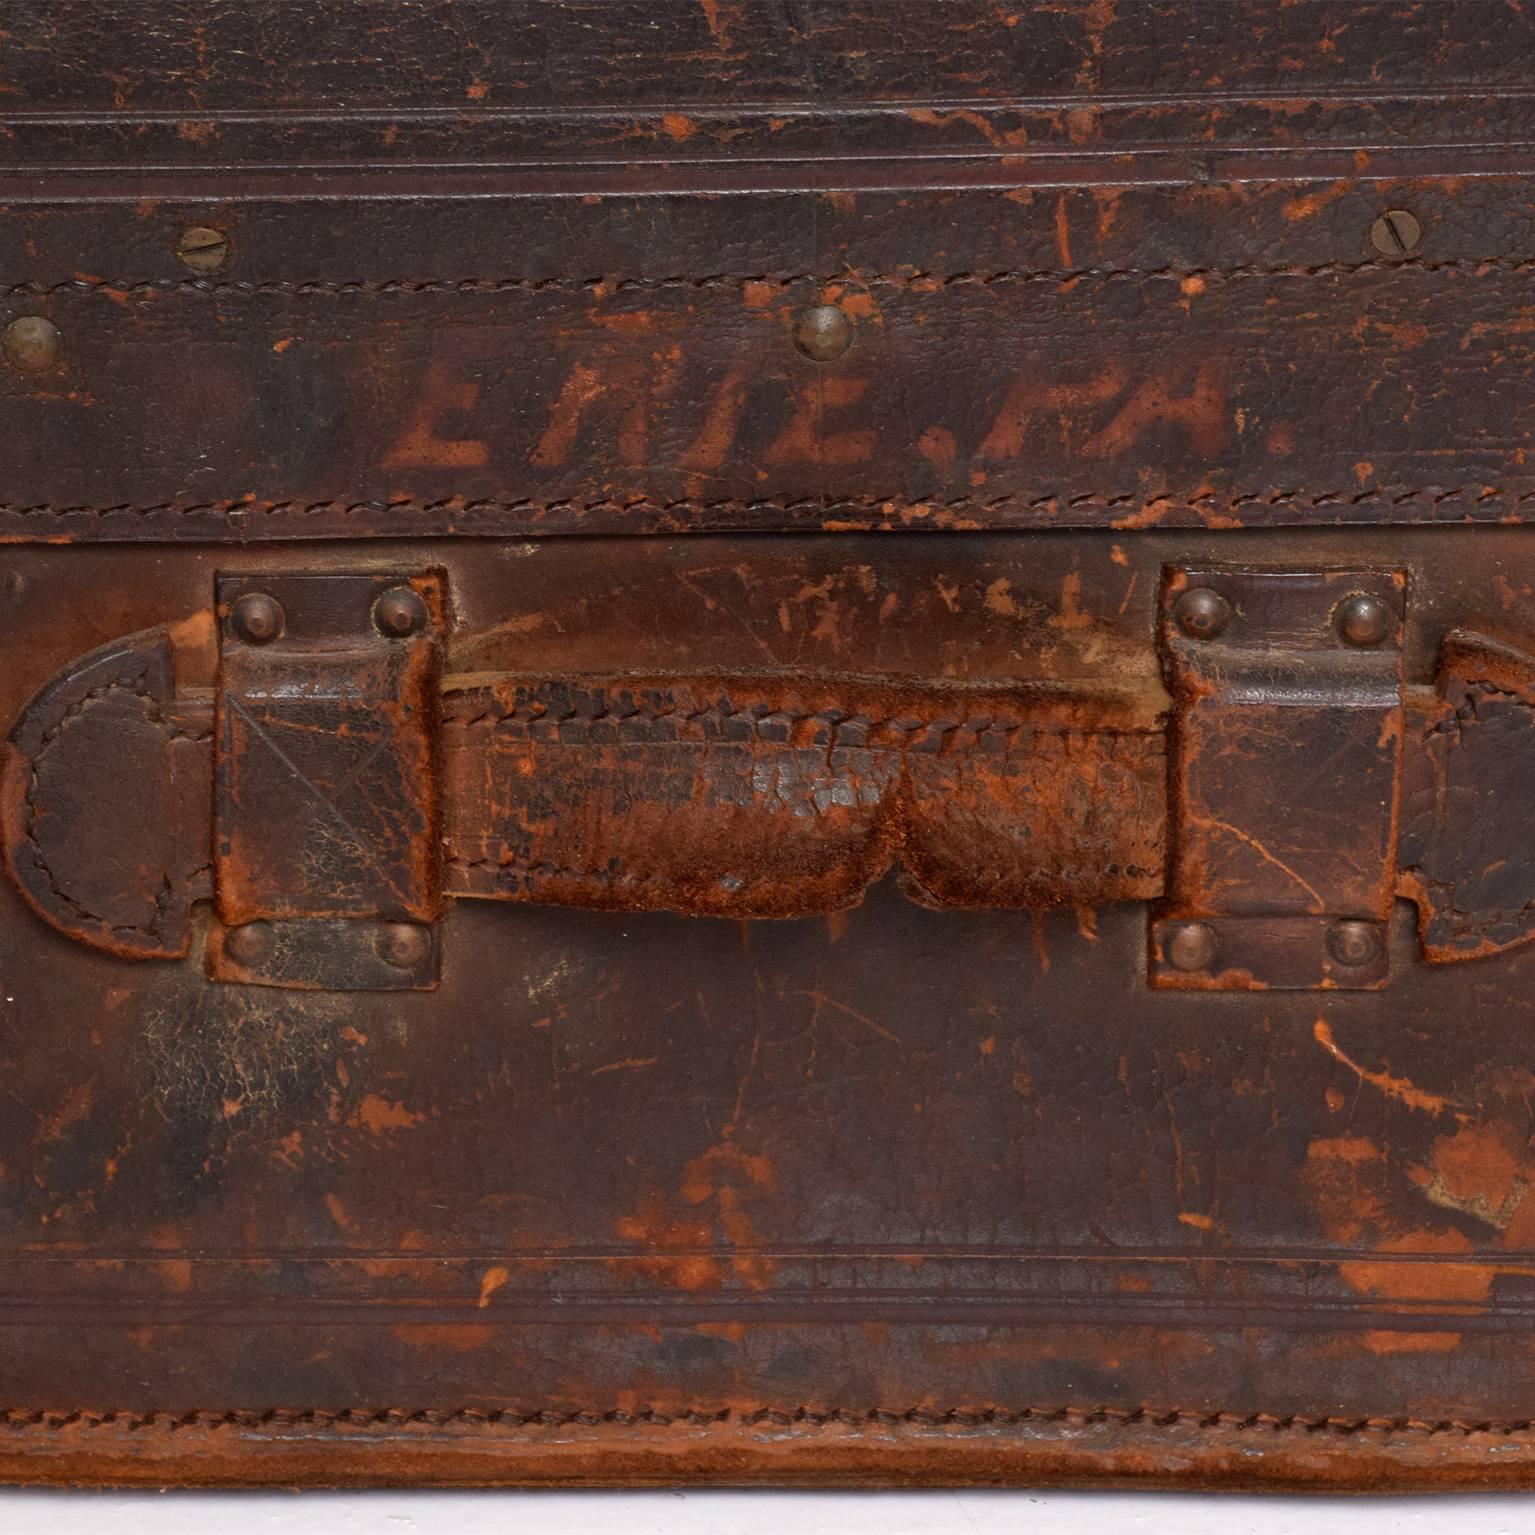 An antique travel leather trunk.
Beautiful vintage patina.
No lock present. Unrestored.
Dimensions: 16" H x 14"mD x 26" W, inside 7 1/2" H x 24 1/4" W x 13" D.